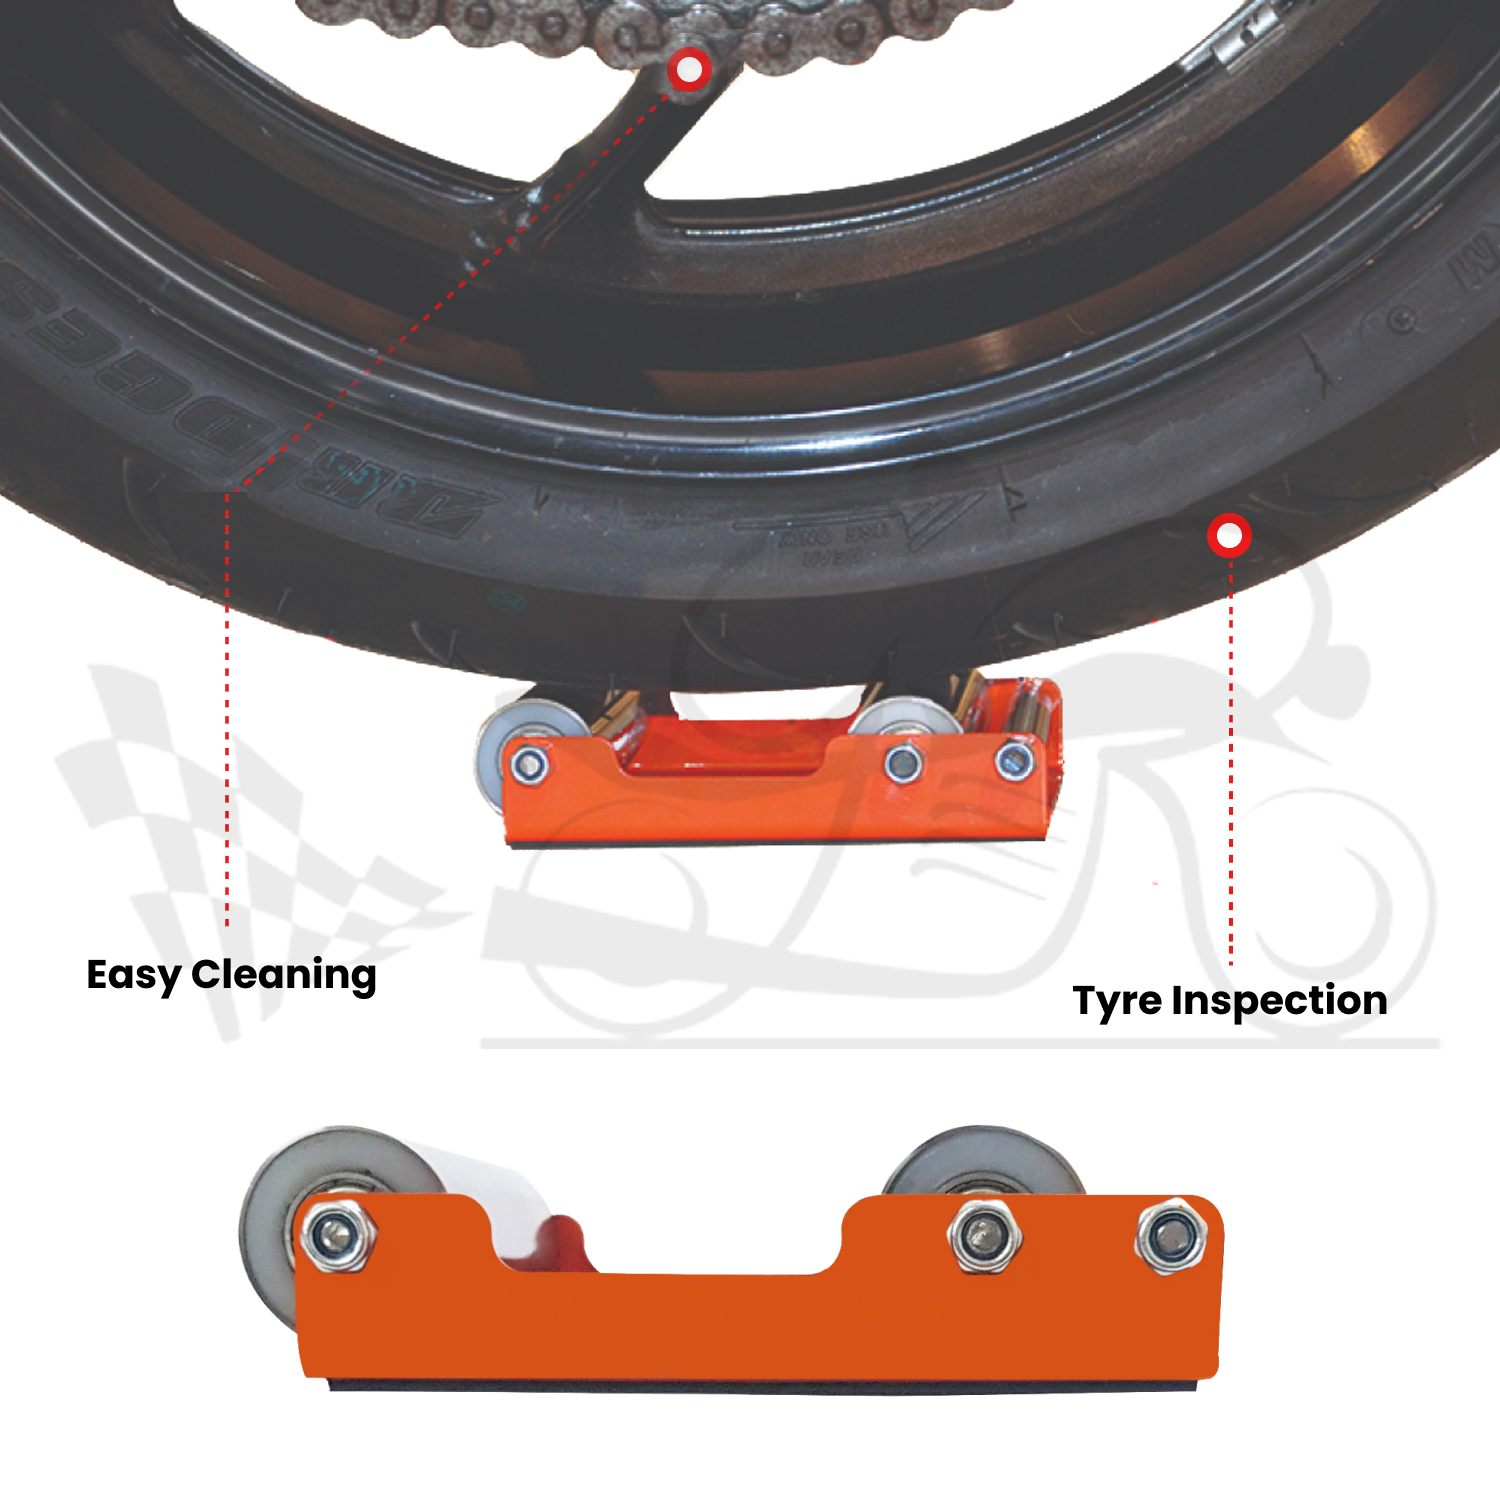 Grandbiker Universal Portable Wheel Roller for Chain Cleaning and